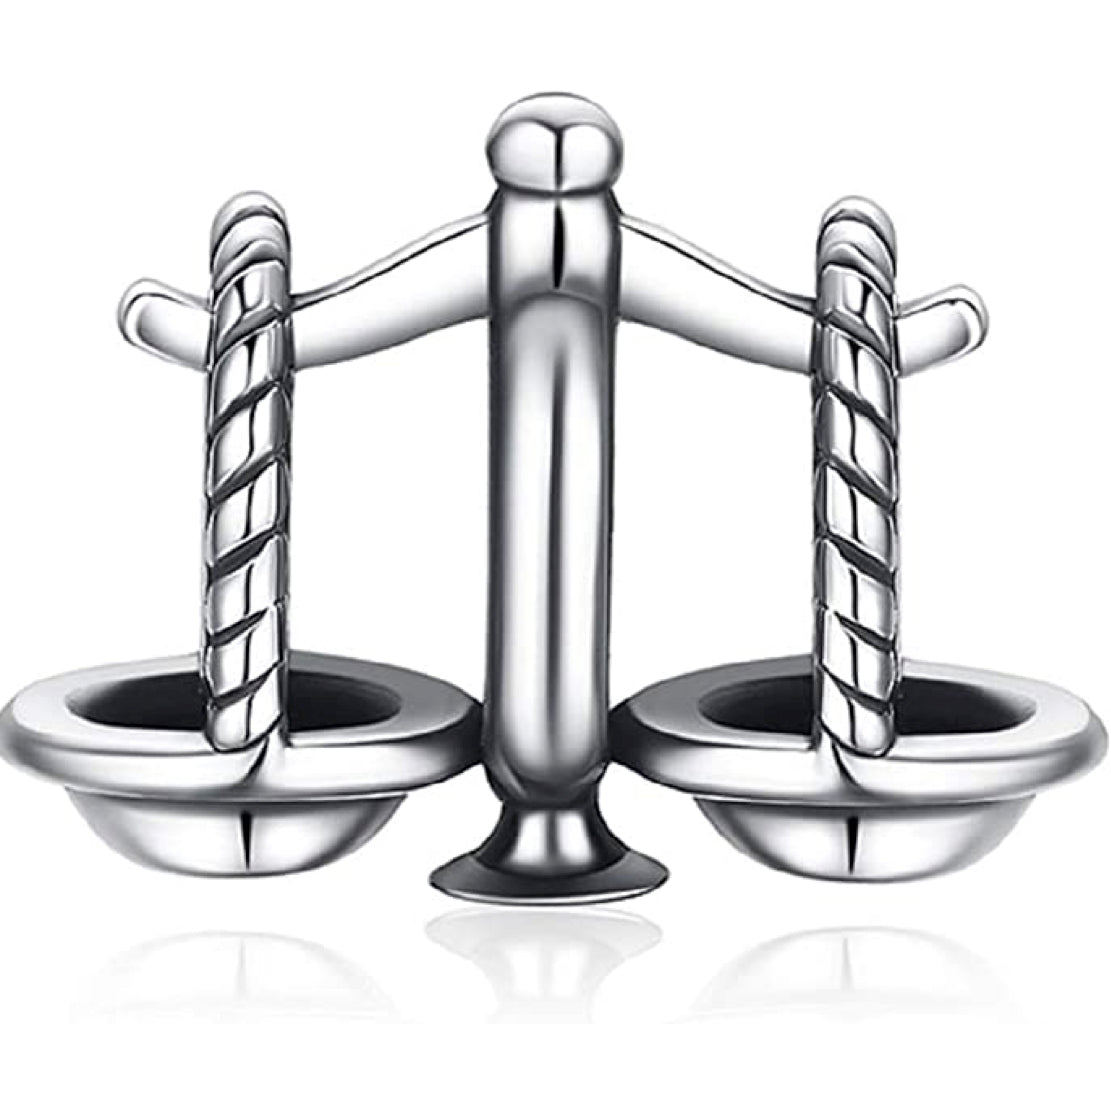 Lawyer Scales of Justice Dangle Charm Bead - Pandora Compatible